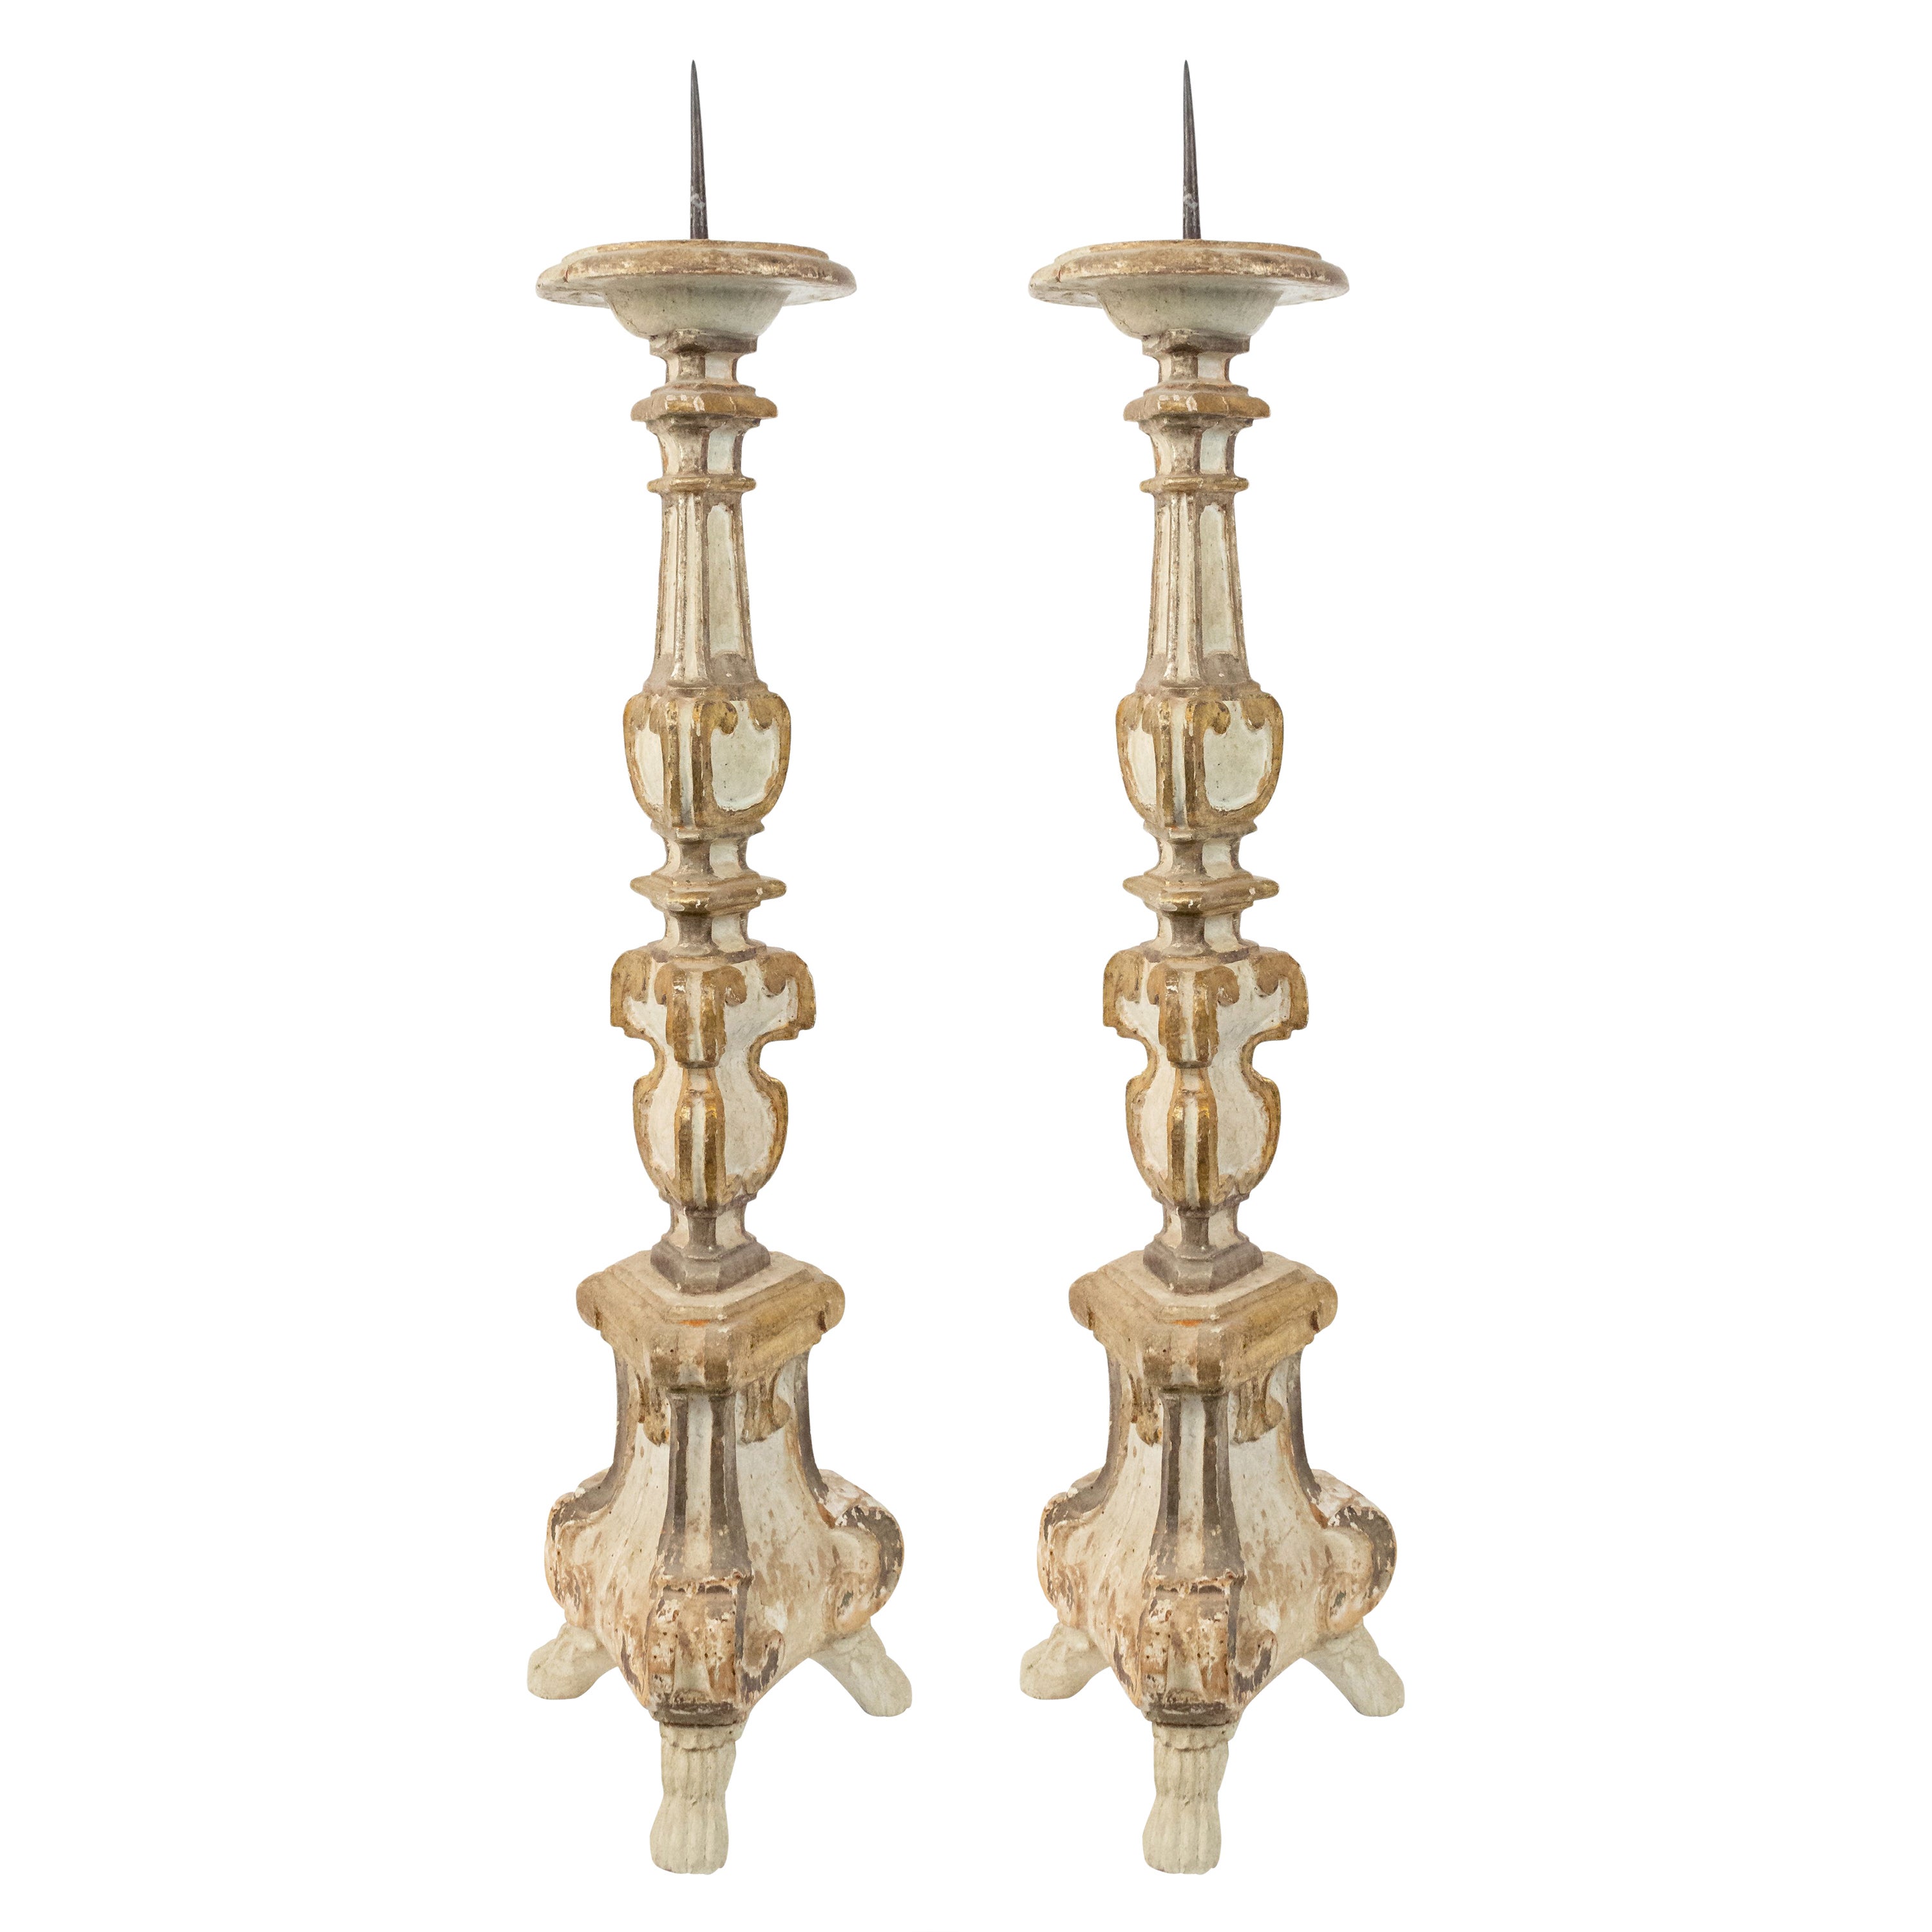 Pair of Italian Neoclassic White and Gilt Candlesticks